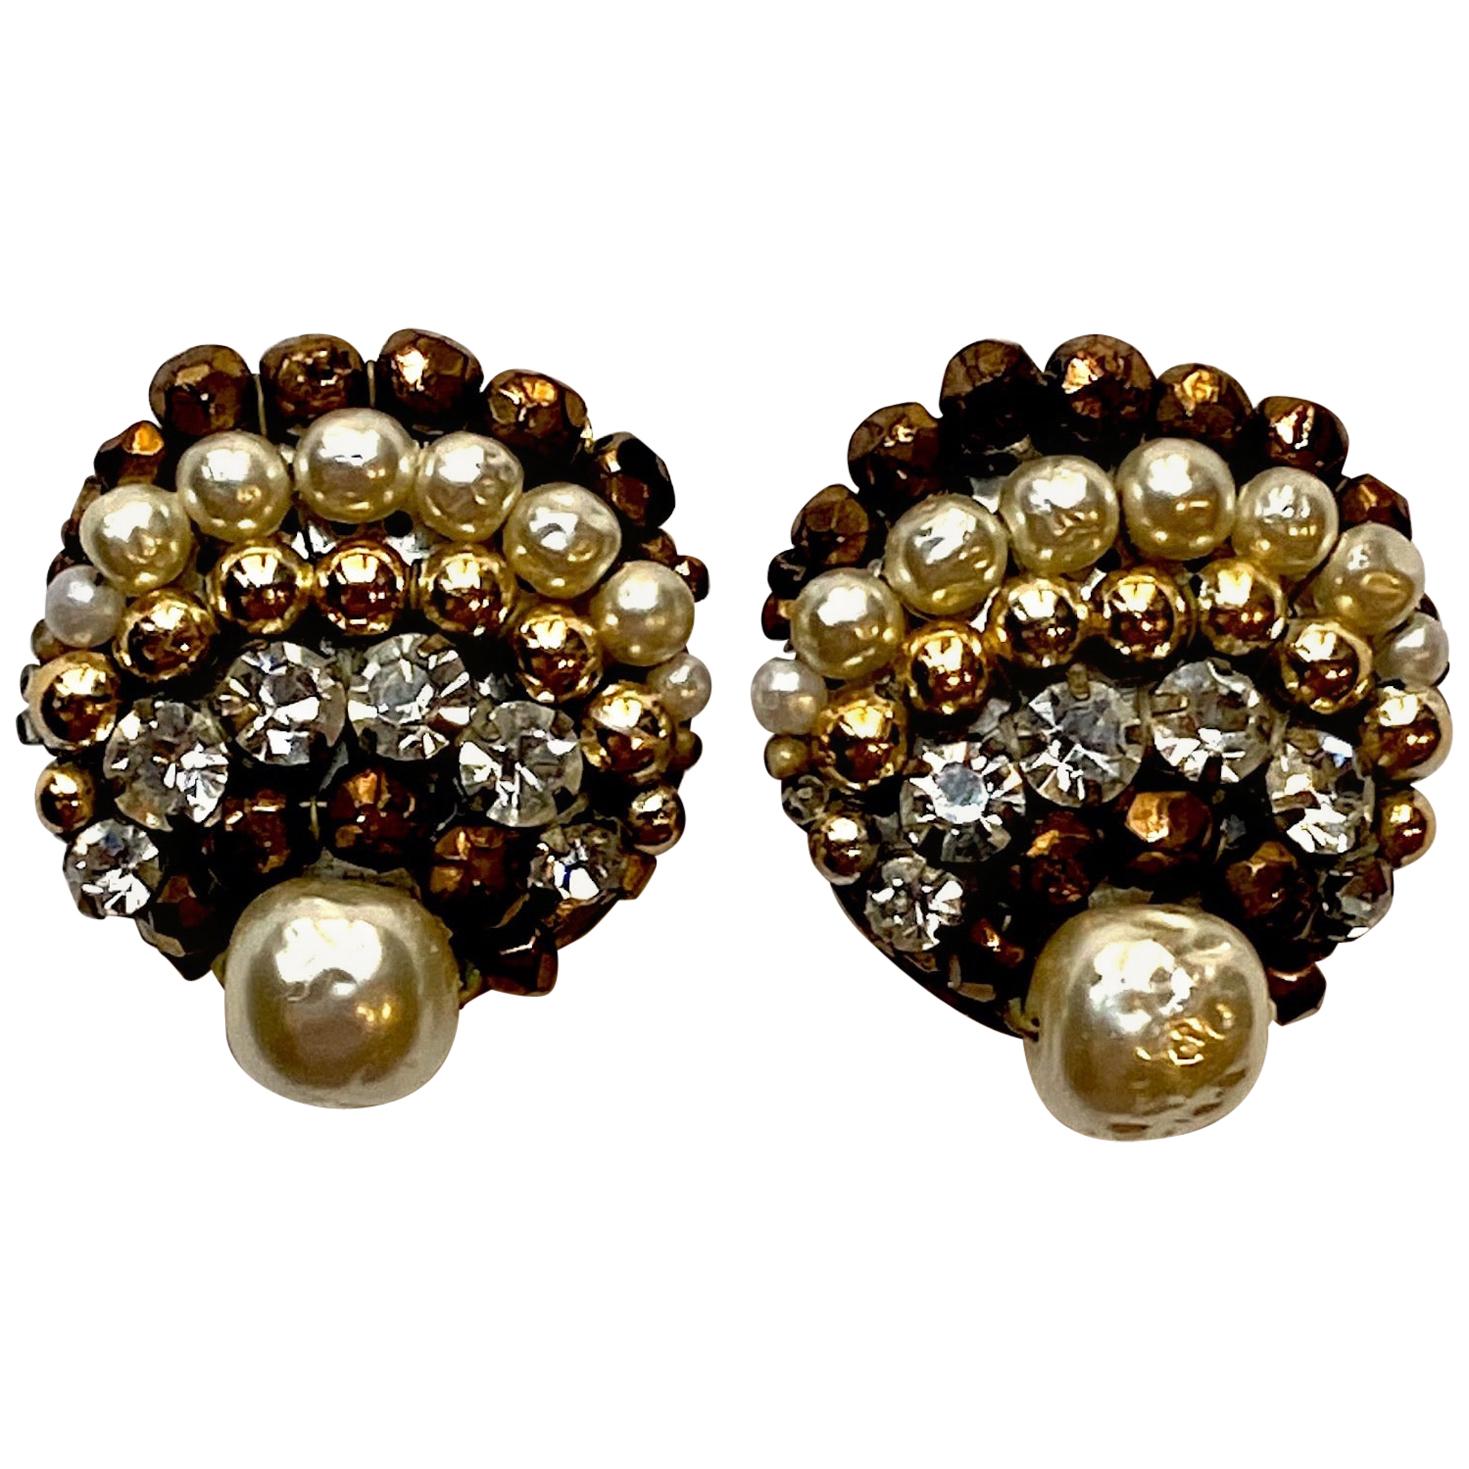 Rare and Stunning Coppola e Toppo Earrings c. 1965 at 1stDibs